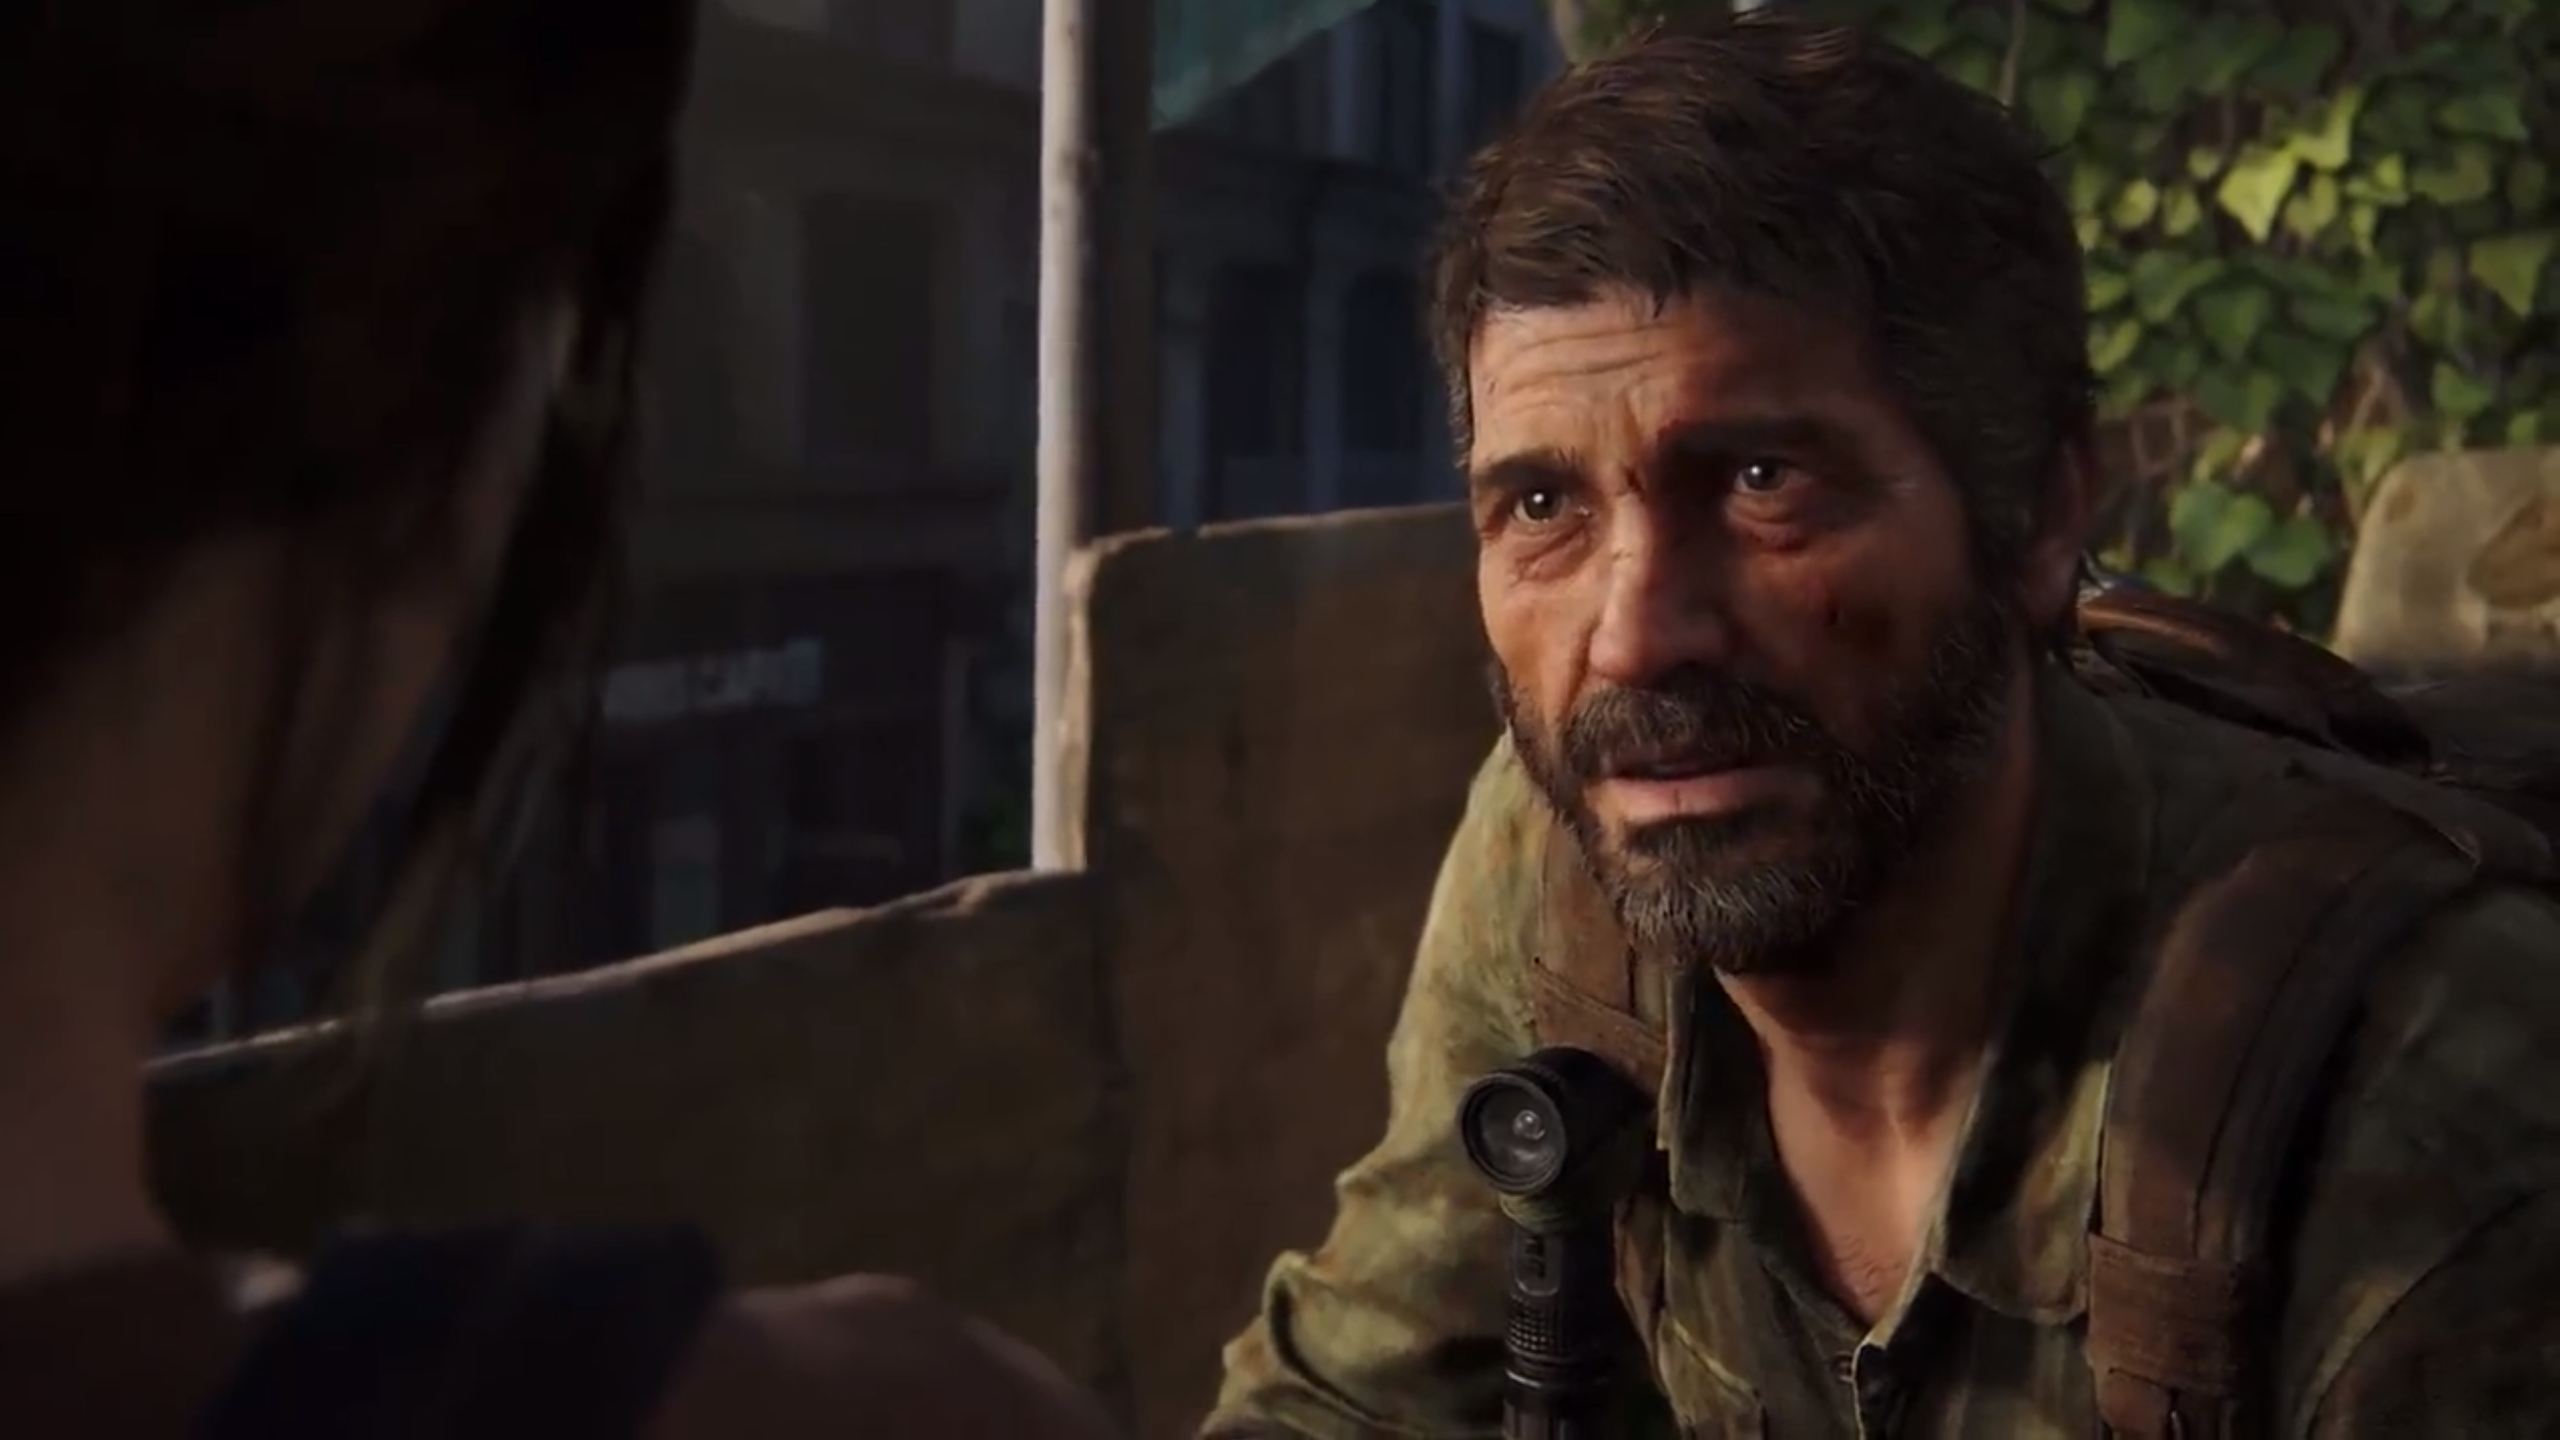 Naughty Dog shows off its own Last of Us Part 1 graphics comparison | GamesRadar+